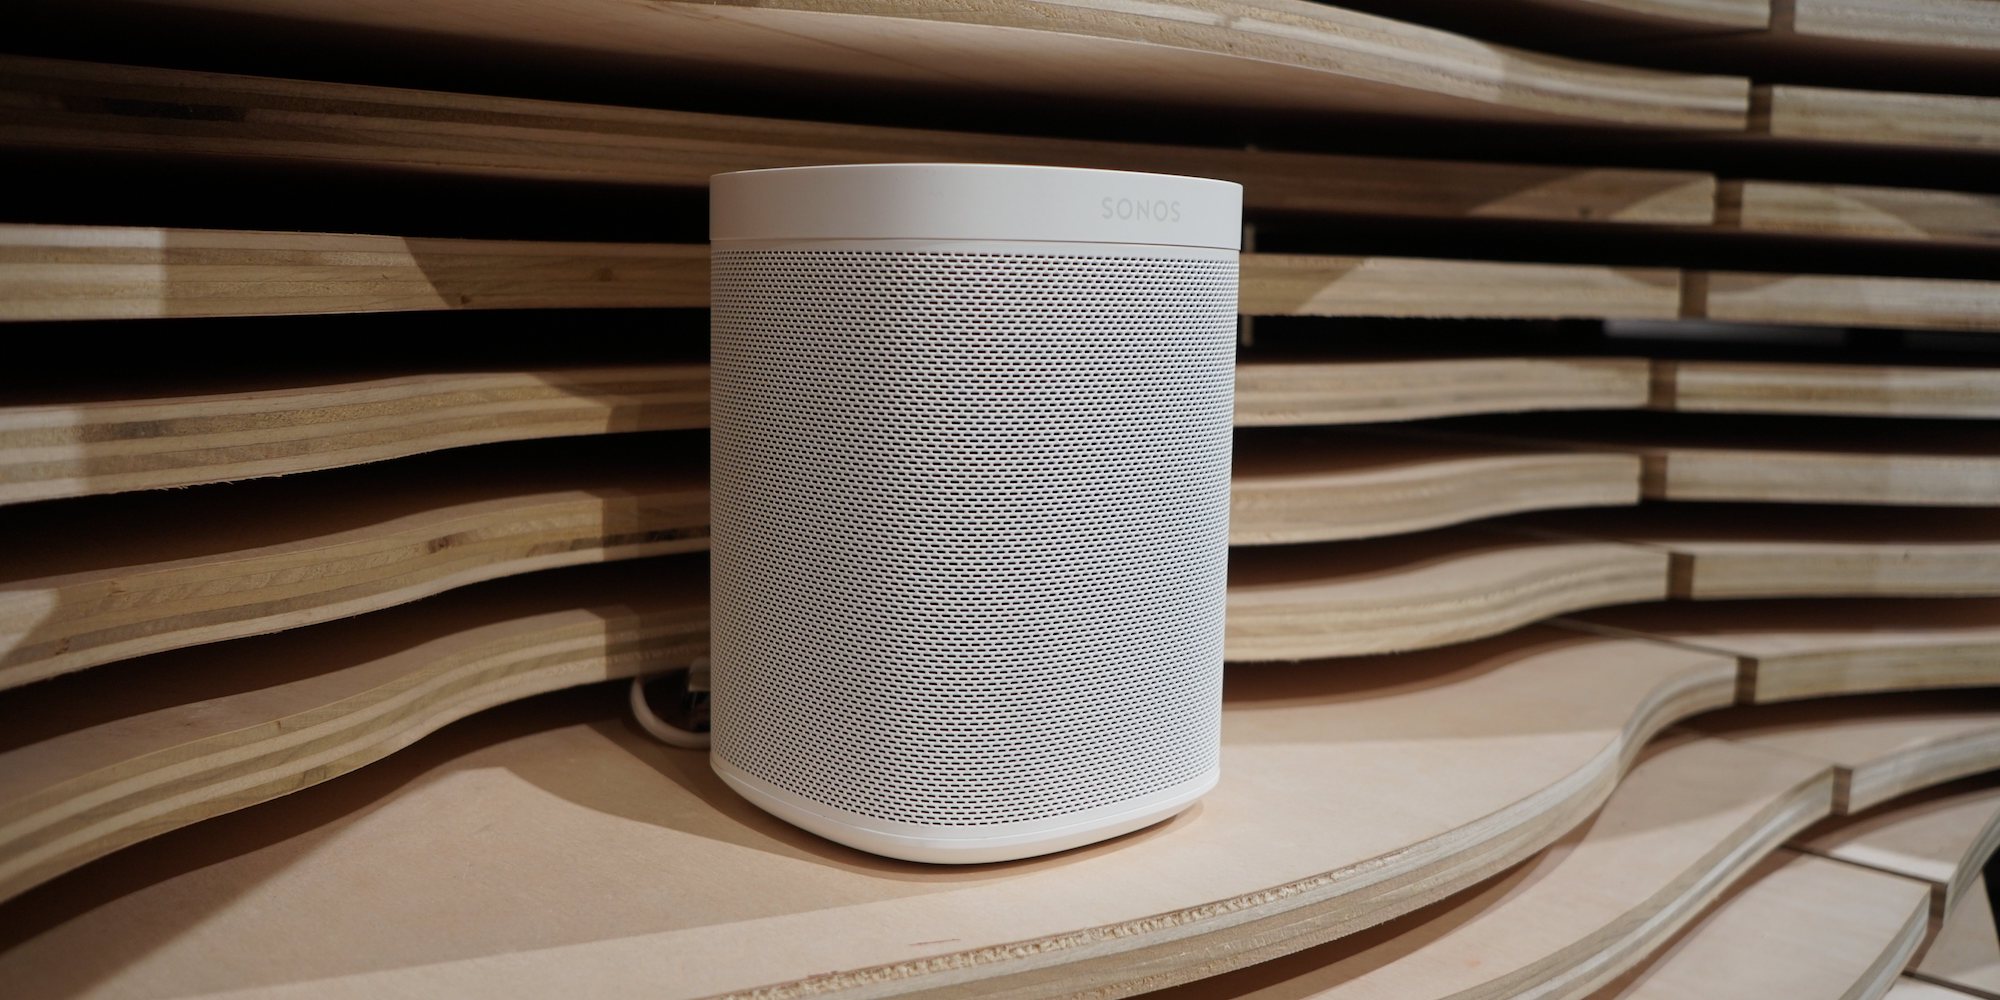 Sonos CEO says competing with Apple a 'reward' as work on Siri integration continues - 9to5Mac